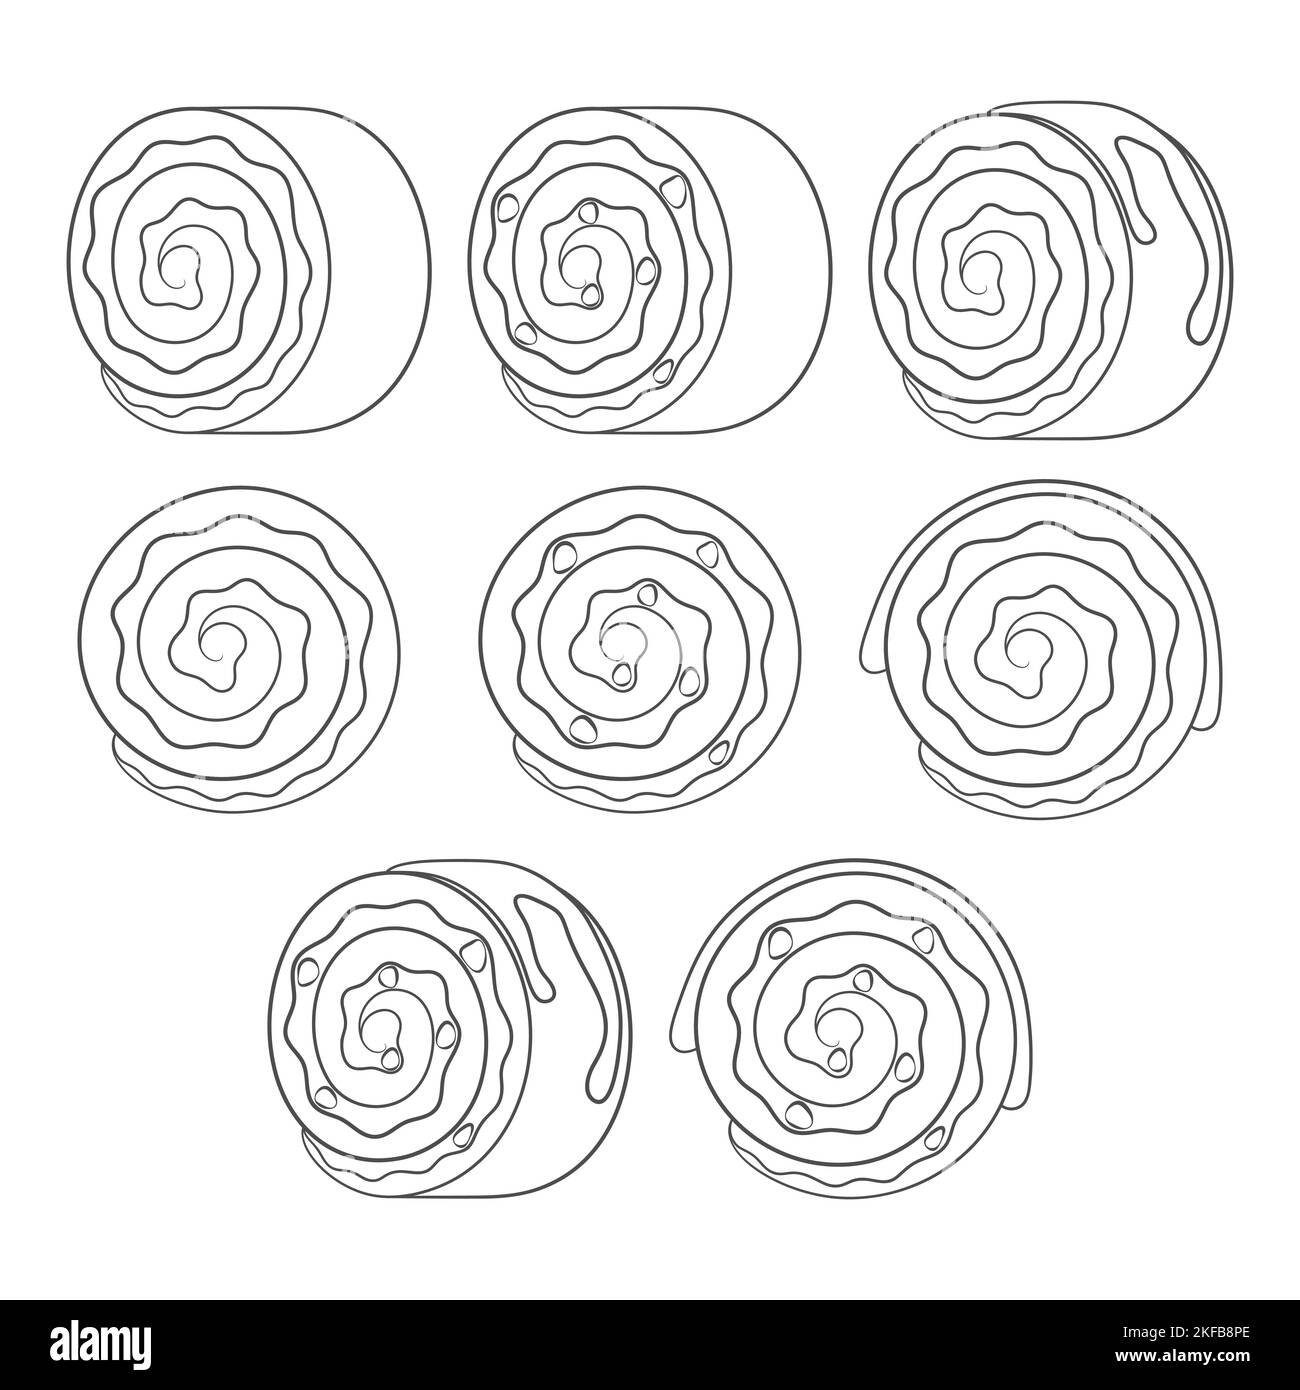 Set of black and white illustrations with a cake roll. Isolated vector objects on a white background. Stock Vector